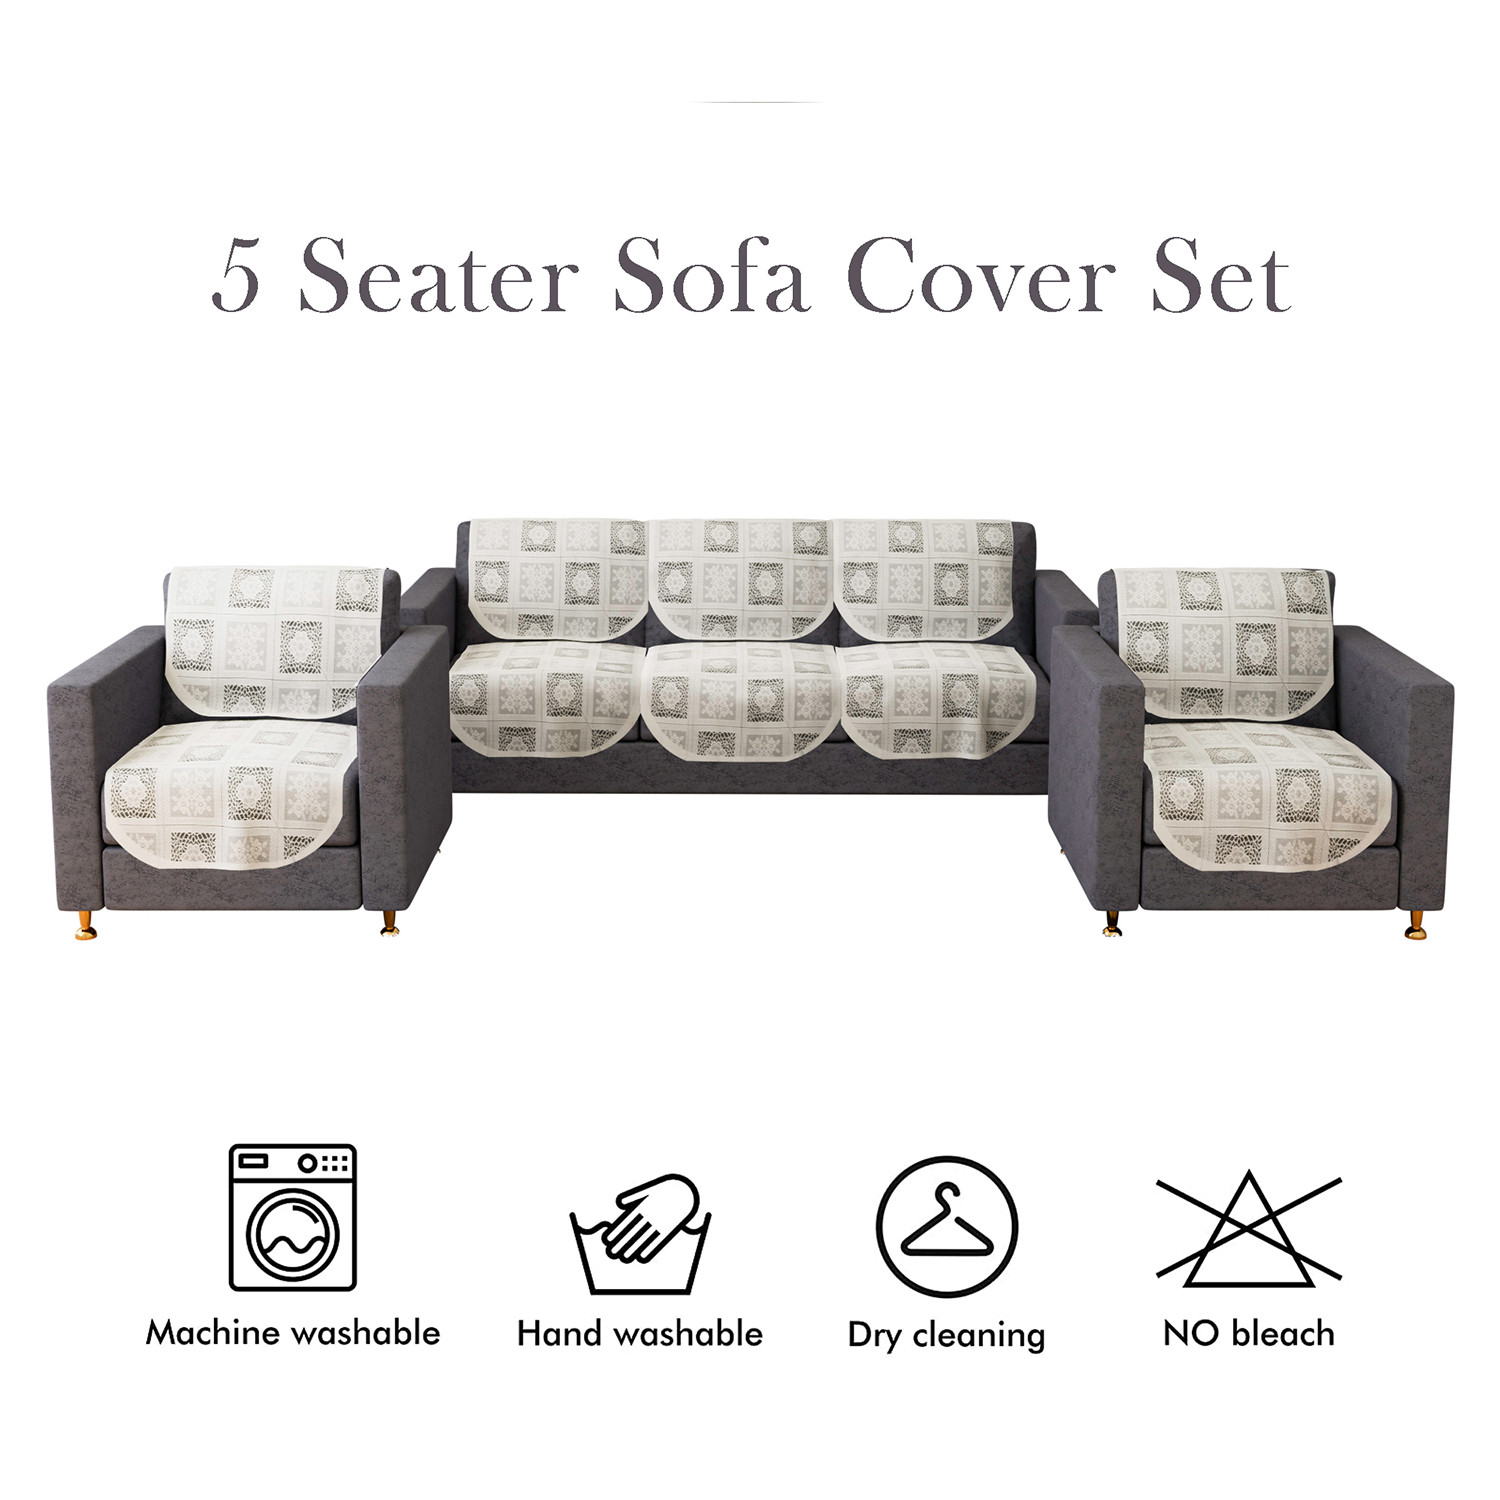 Kuber Industries Sofa Cover | Cotton Net Square Flower Sofa Cover | 5-Seater Sofa Cover for Home Decor | Sofa cover Set for Living room | Cream